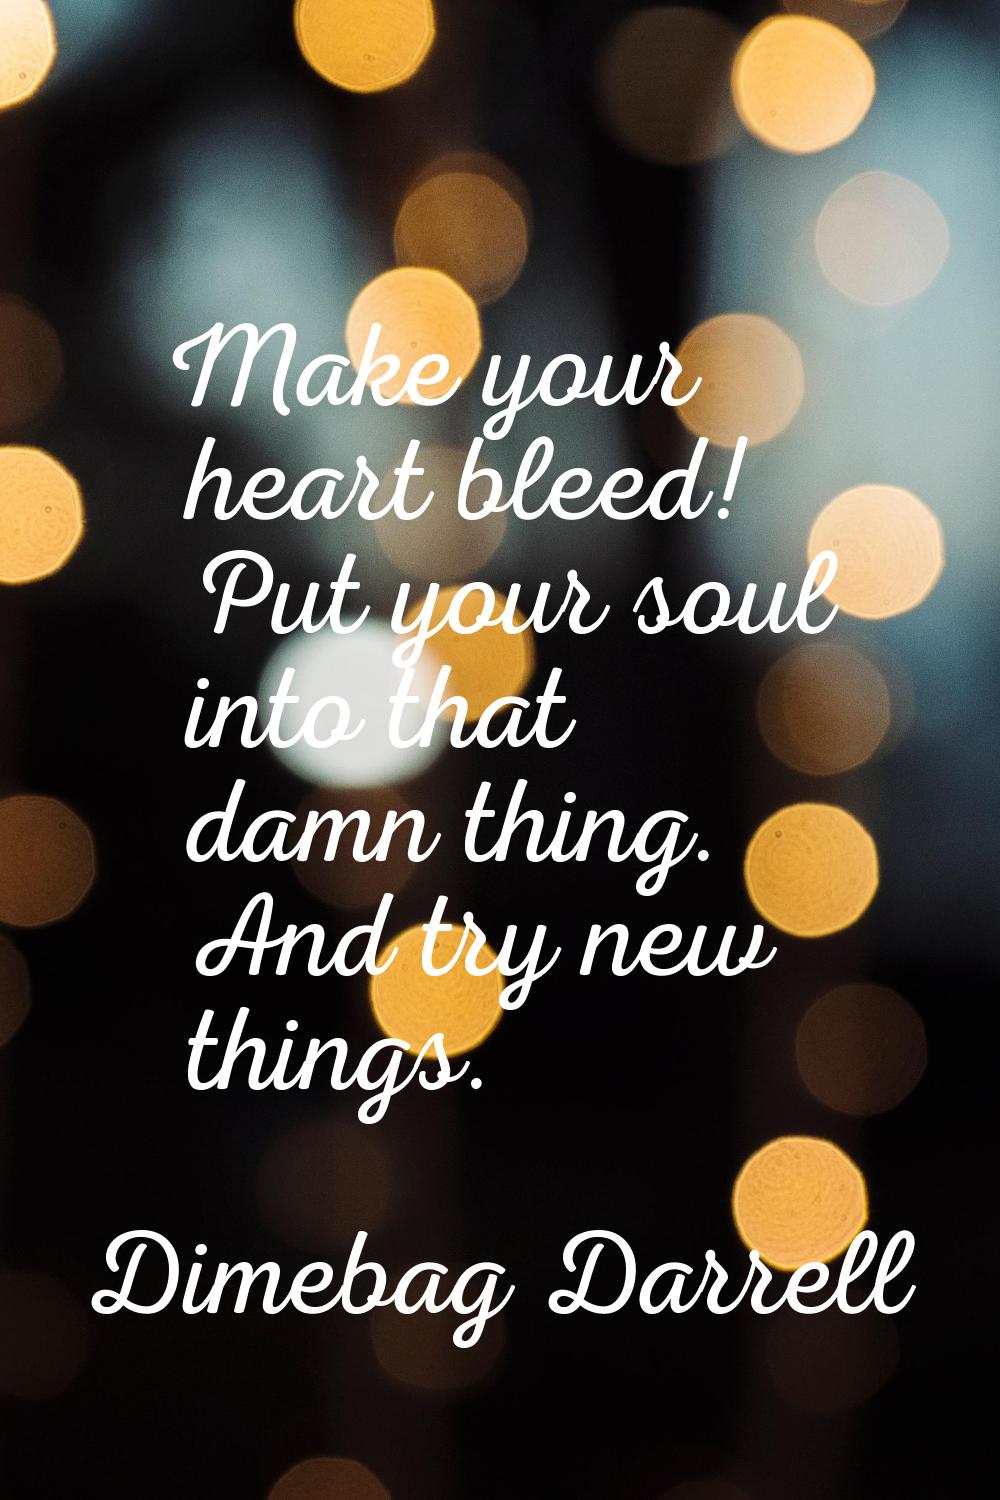 Make your heart bleed! Put your soul into that damn thing. And try new things.